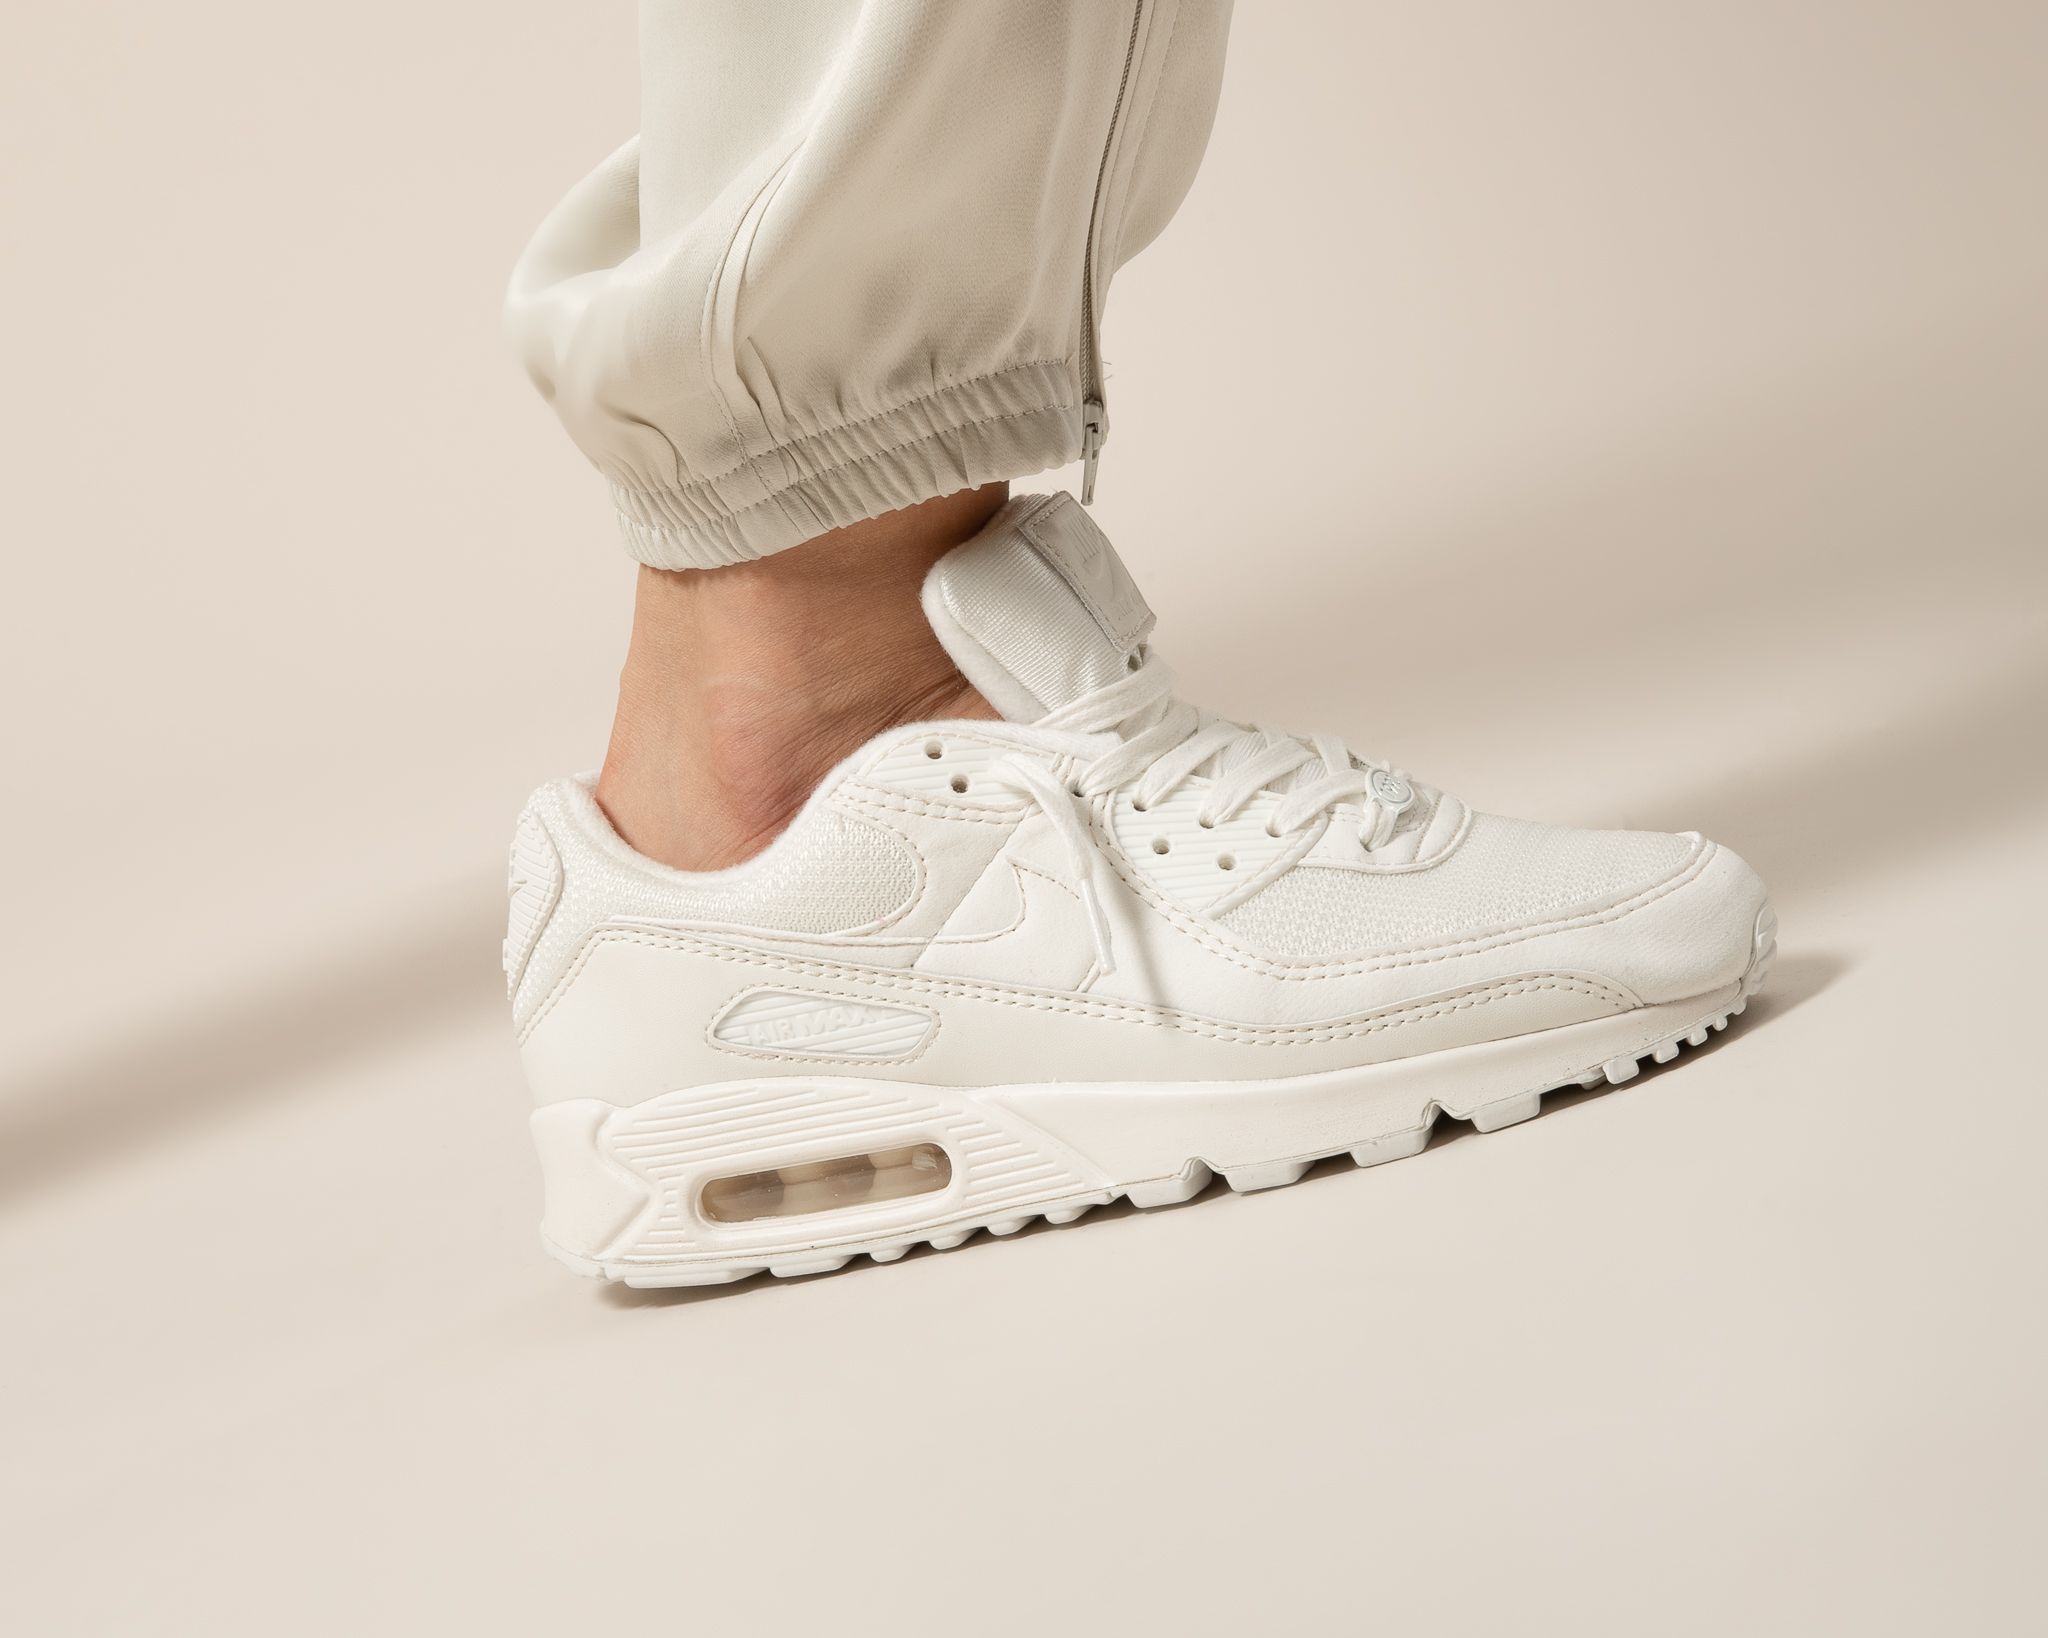 Titolo on Twitter: "#outNOW the Nike Air Max 90 NRG "Sail" debuts in the  new, recrafted shape 🔎 that gets very close to its original form from  1990.⁠ L i n k